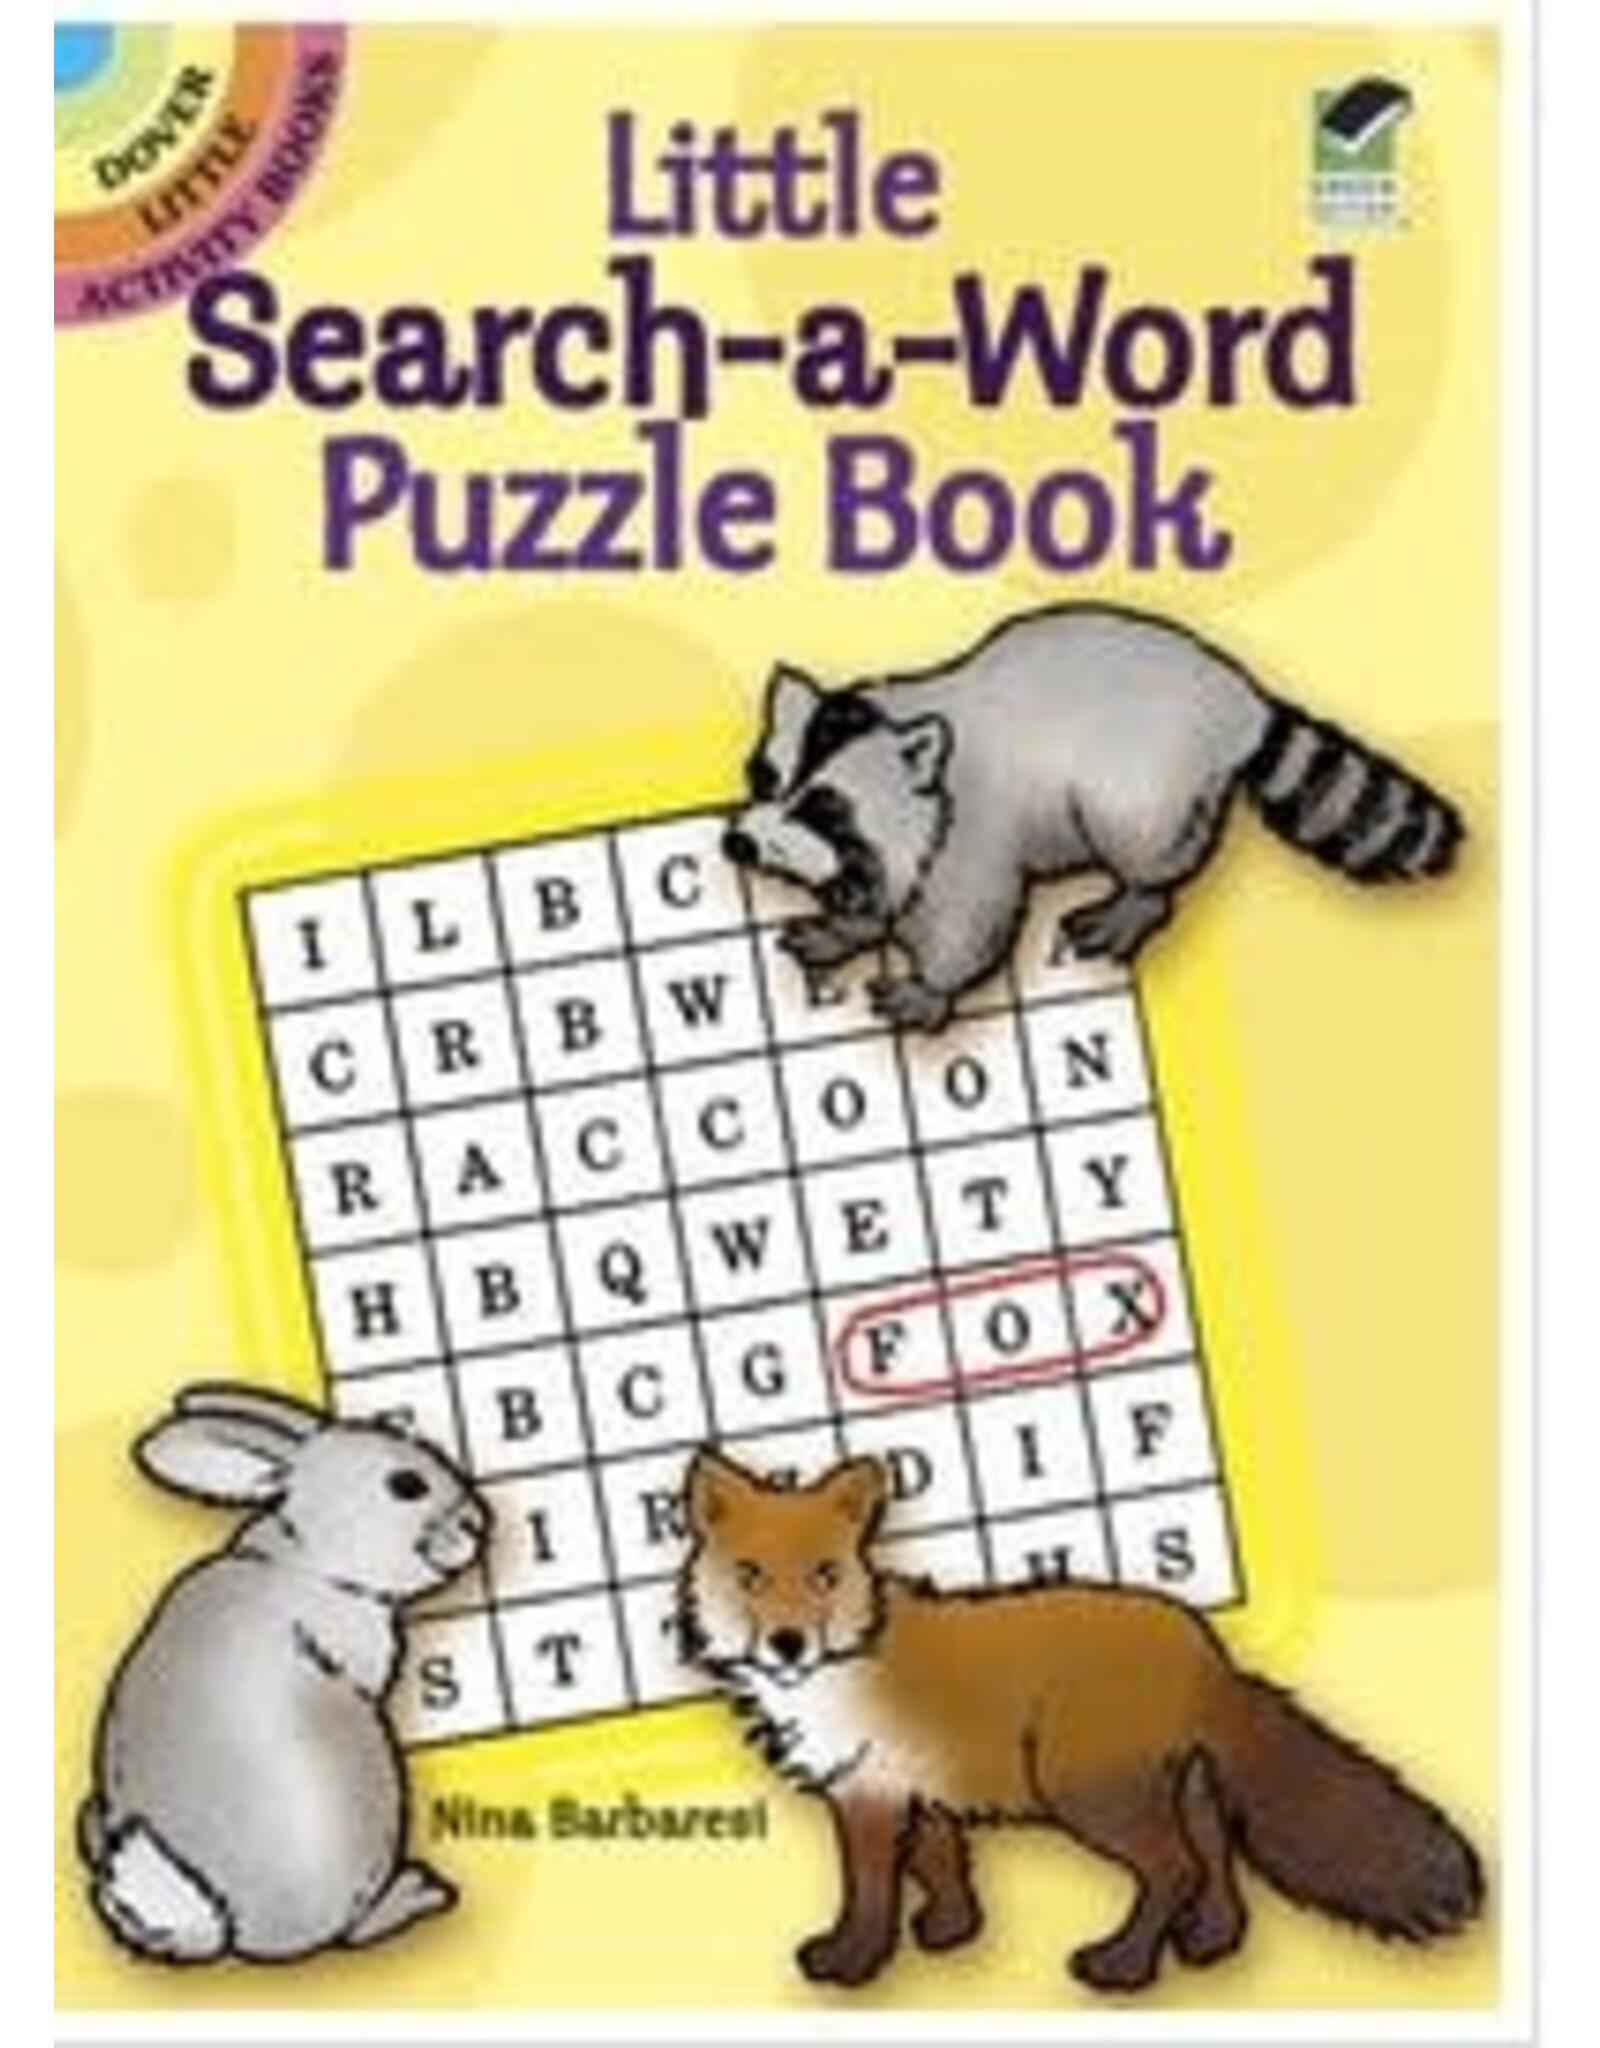 Dover Publications Little Search-a-Word Puzzle Book  By: Nina Barbaresi